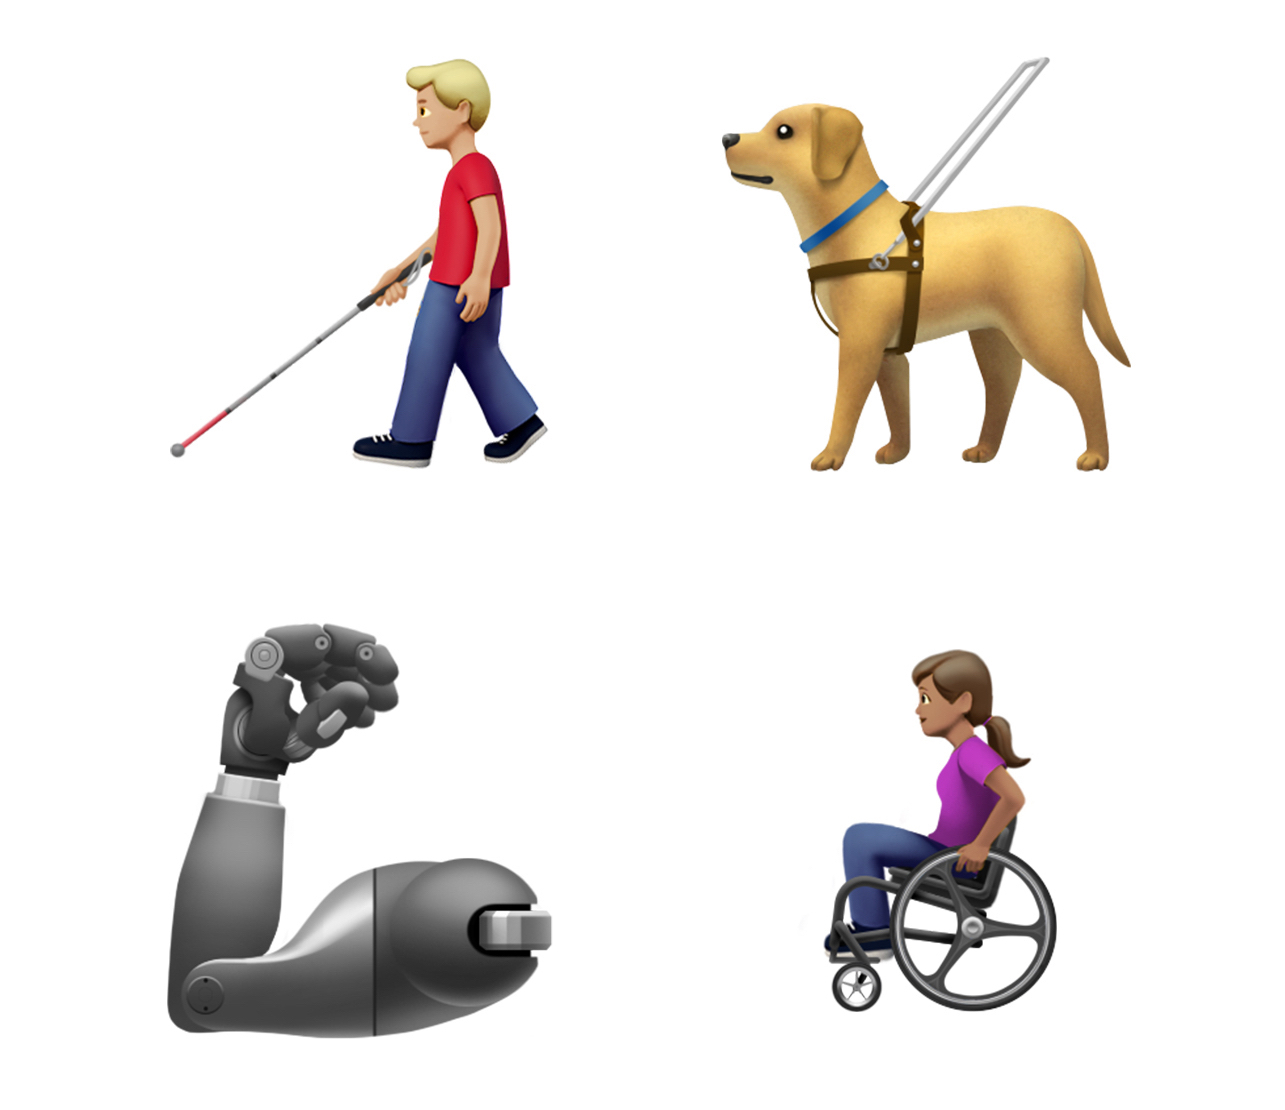 Apple's new disability-themed emoji provide a more inclusive experience for all. There are now options that depict users of both power and self-propelled mobility devices, individuals who communicate using sign language, and individuals who use sight-seeing canes, in addition to prosthetic limbs and hearing aids.